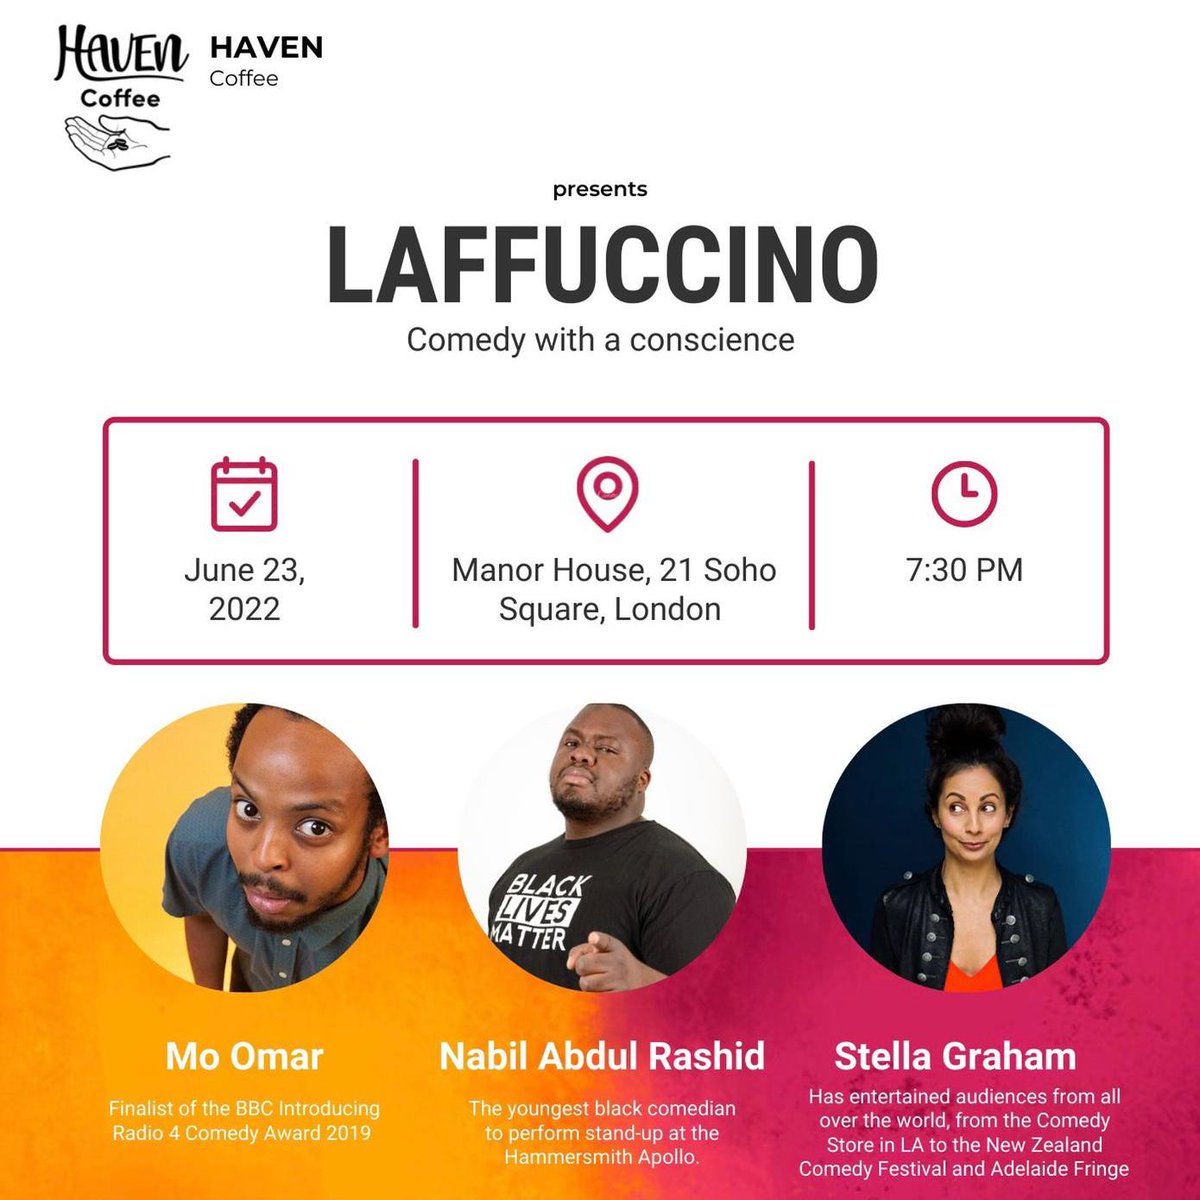 Very excited to have Haven Coffee back at our venue with their 5th instalment of LAFF-UCINO! Join us during #RefugeeWeek for comedy with a conscience with Nabil Abdulrashid, Mo Omar, Stella Graham & More!🤩 Thursday 23rd June 7:30pm 🎟️bit.ly/3Be0mcM @Nabilu